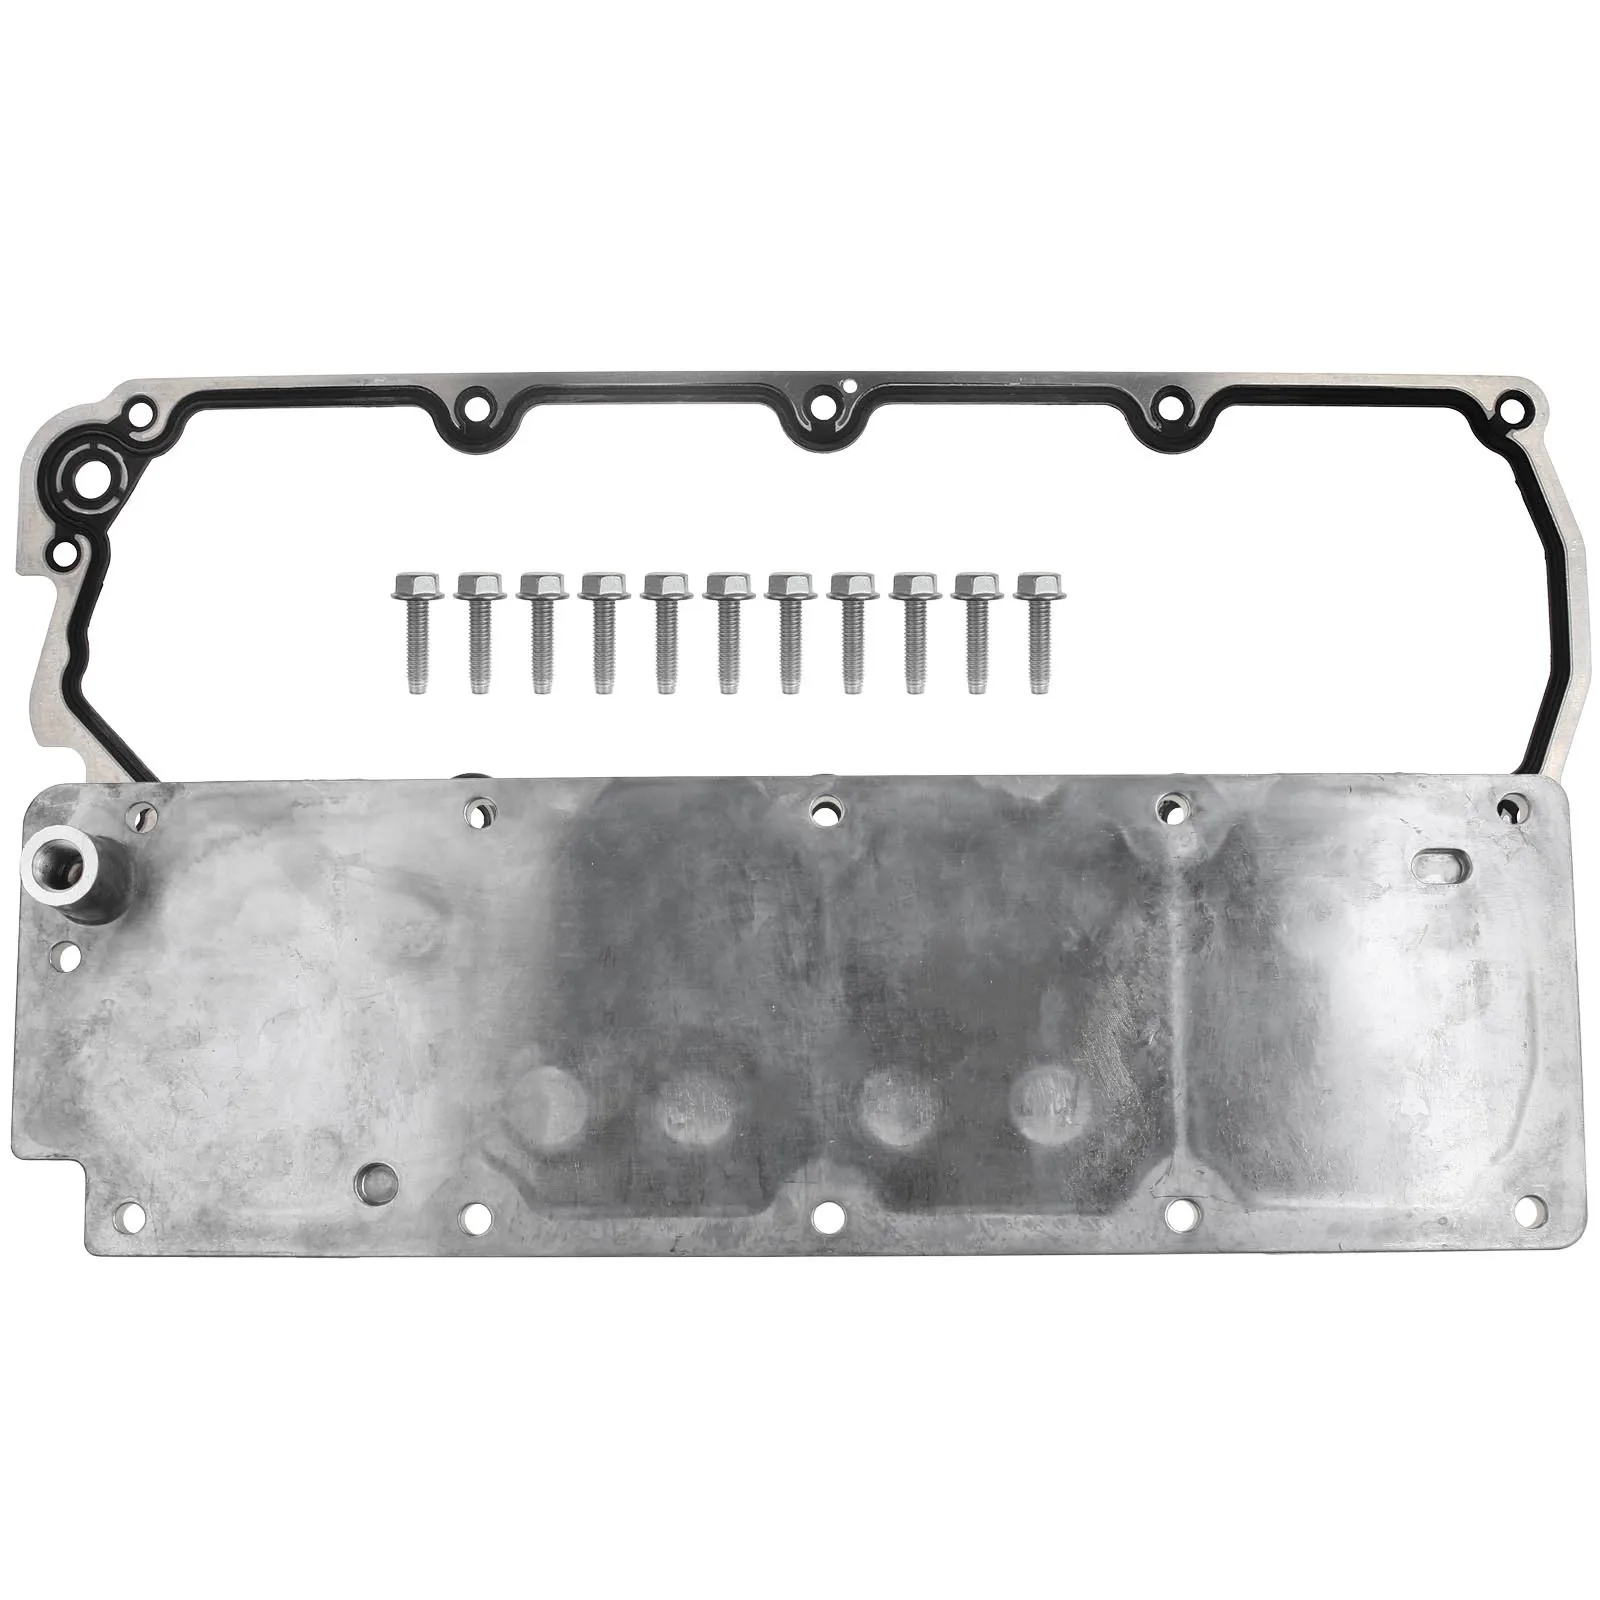 

In-stock CN US Engine Valve Cover with Gasket Bolts for Chevy Silverado GMC Sierra 1500 07-13 12598832